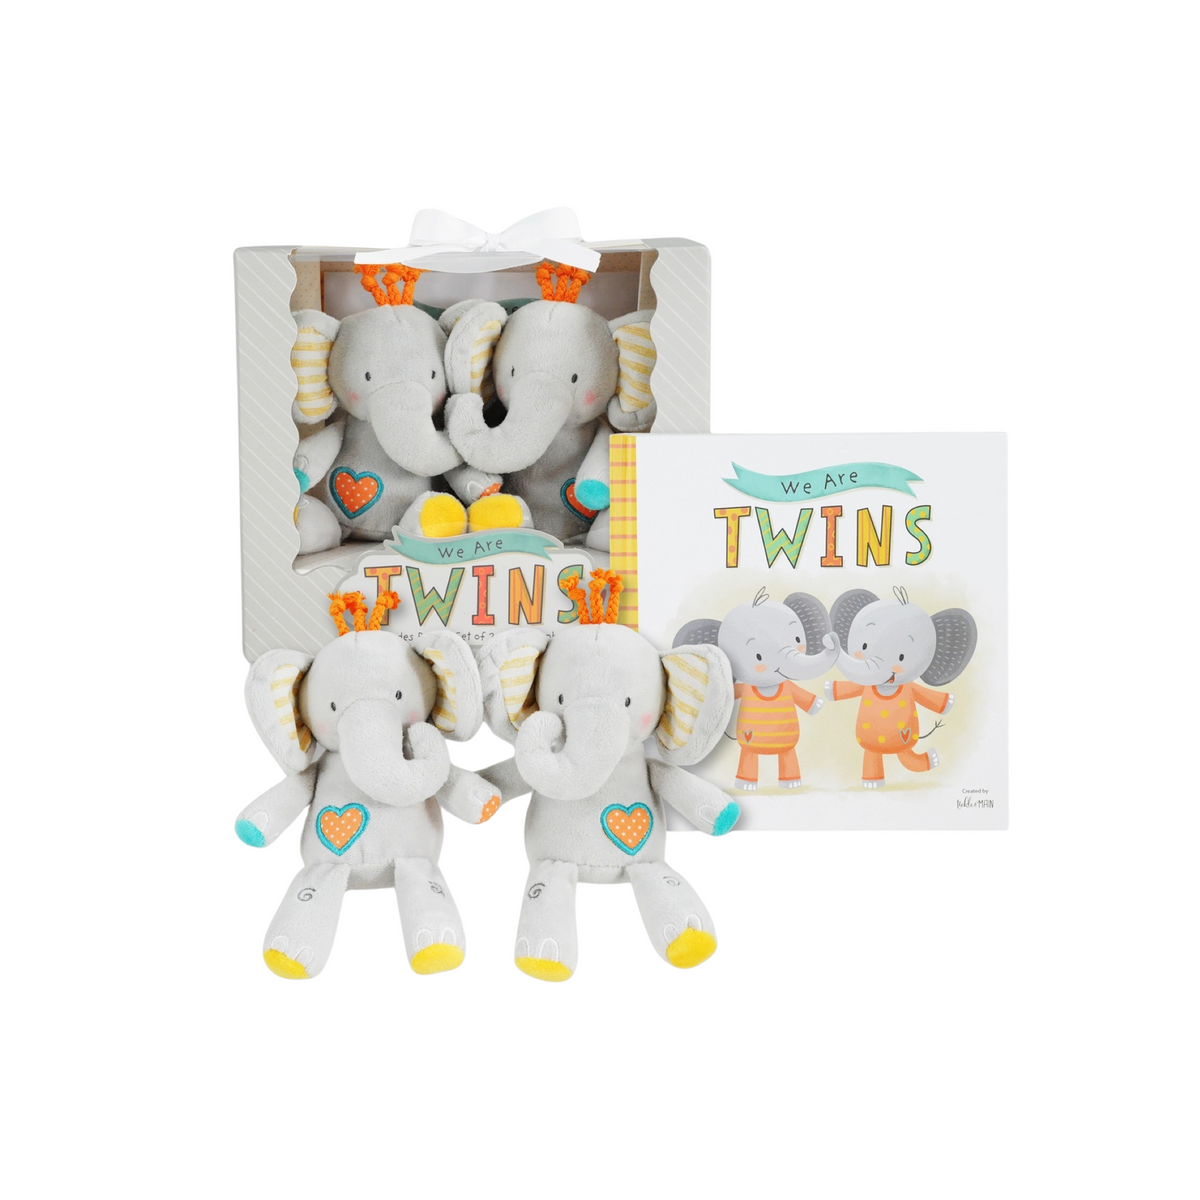 We Are Twins Gift Set &amp; Book